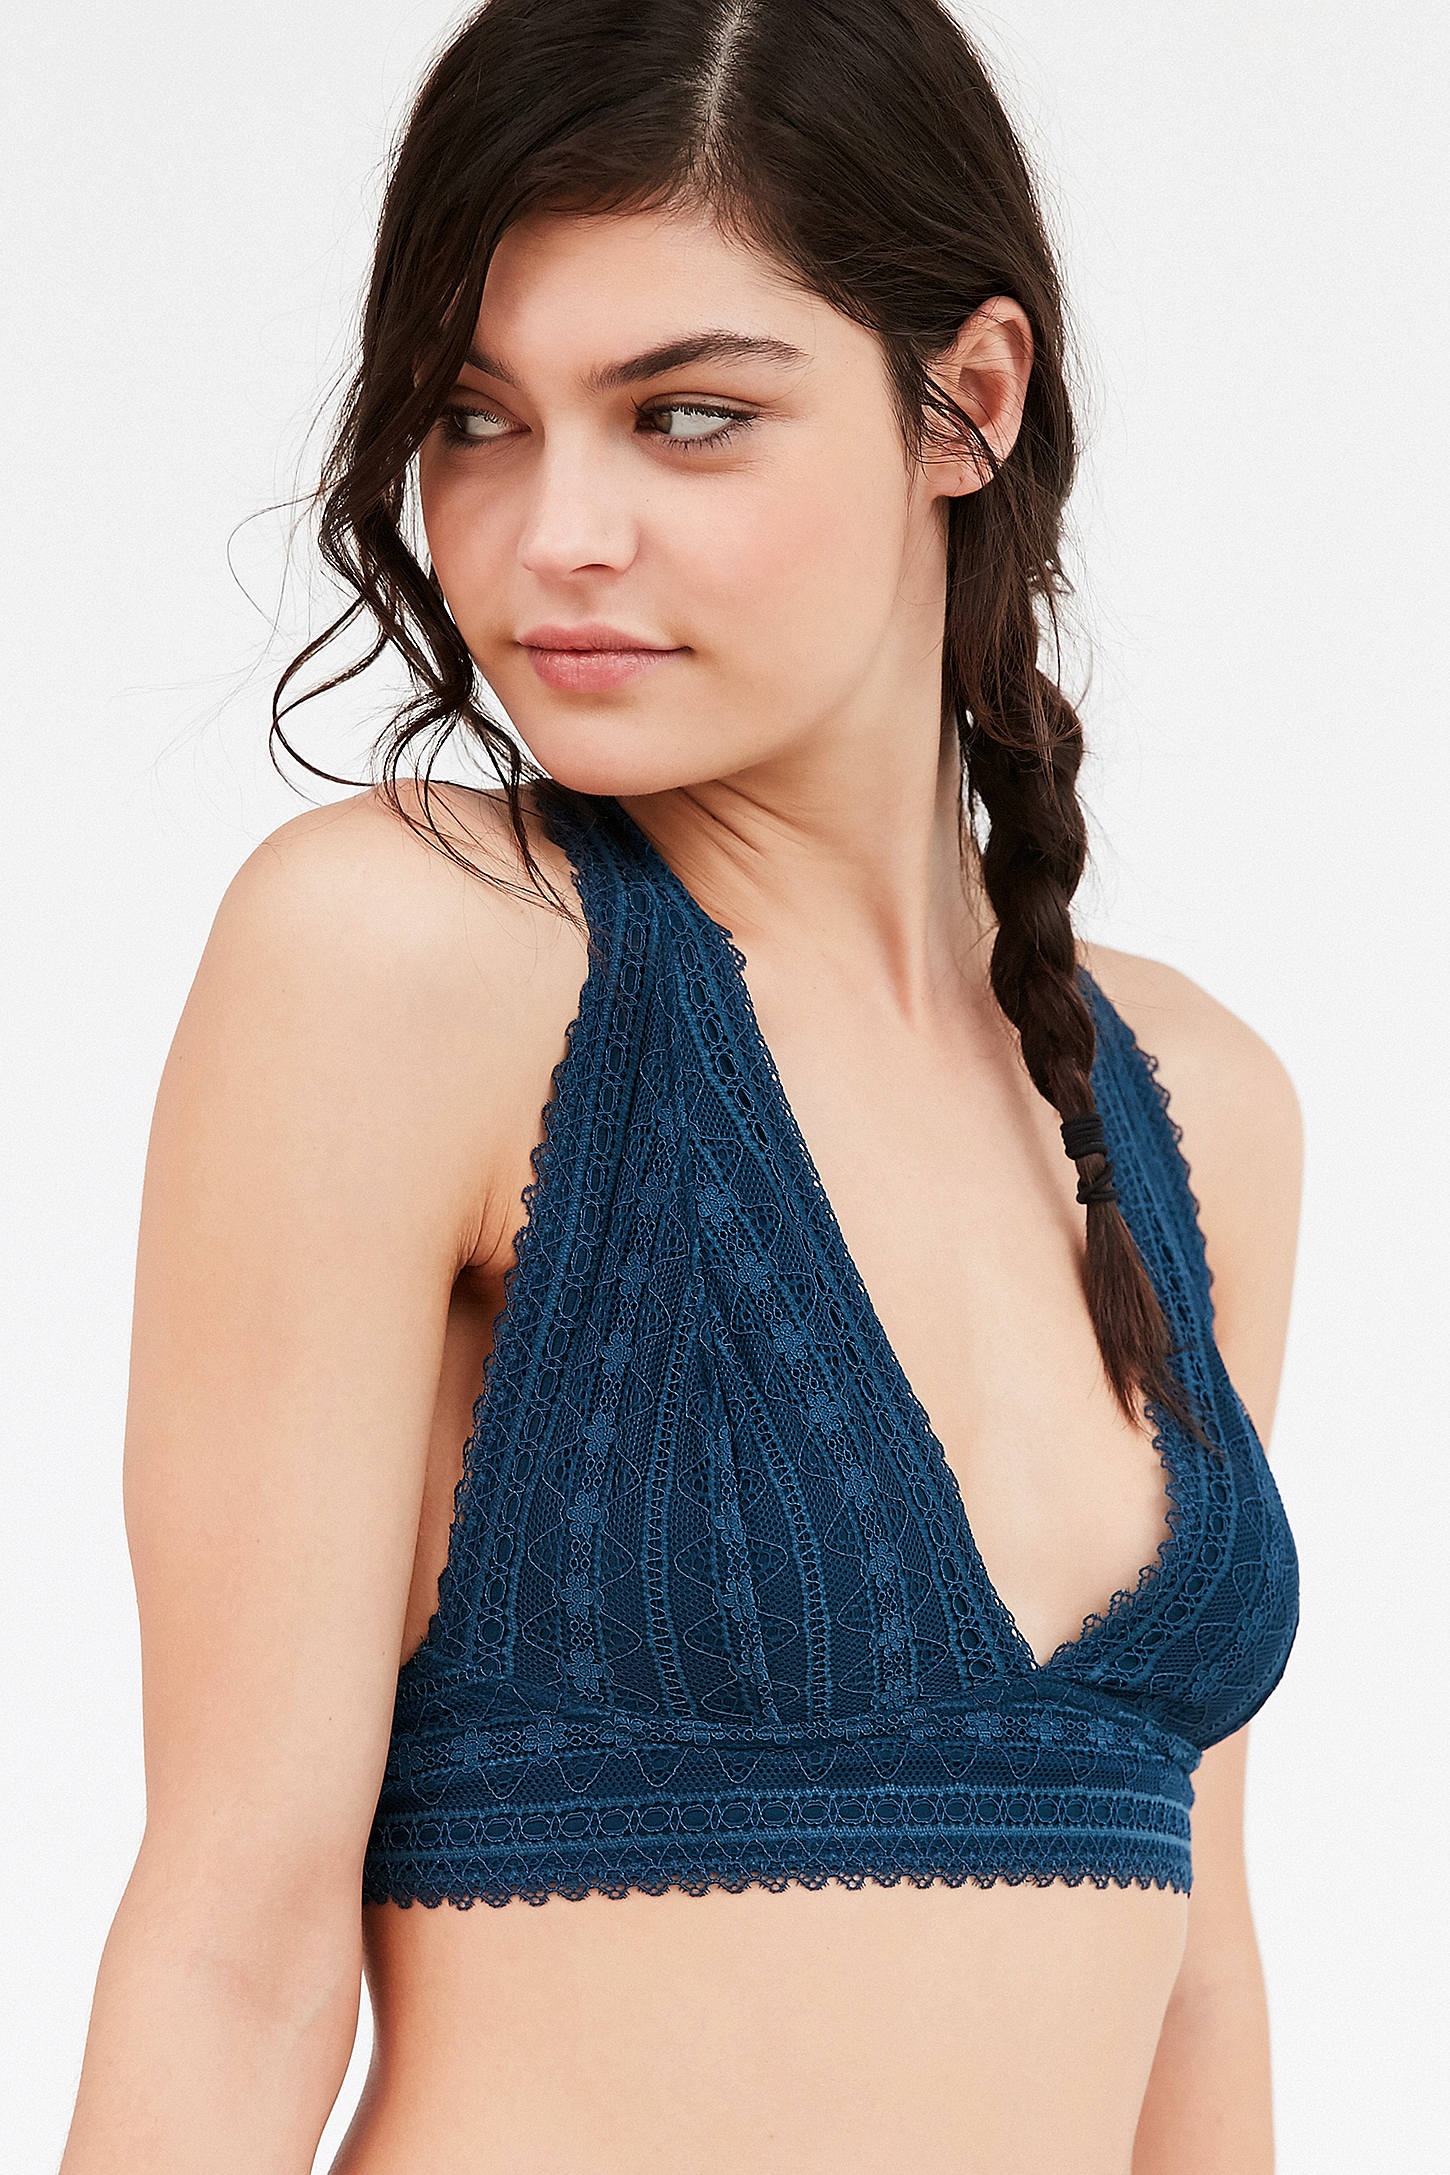 Strappy Back Halter Bralette Plunging Neck Scallop Overlay Bra Made To Be  Seen